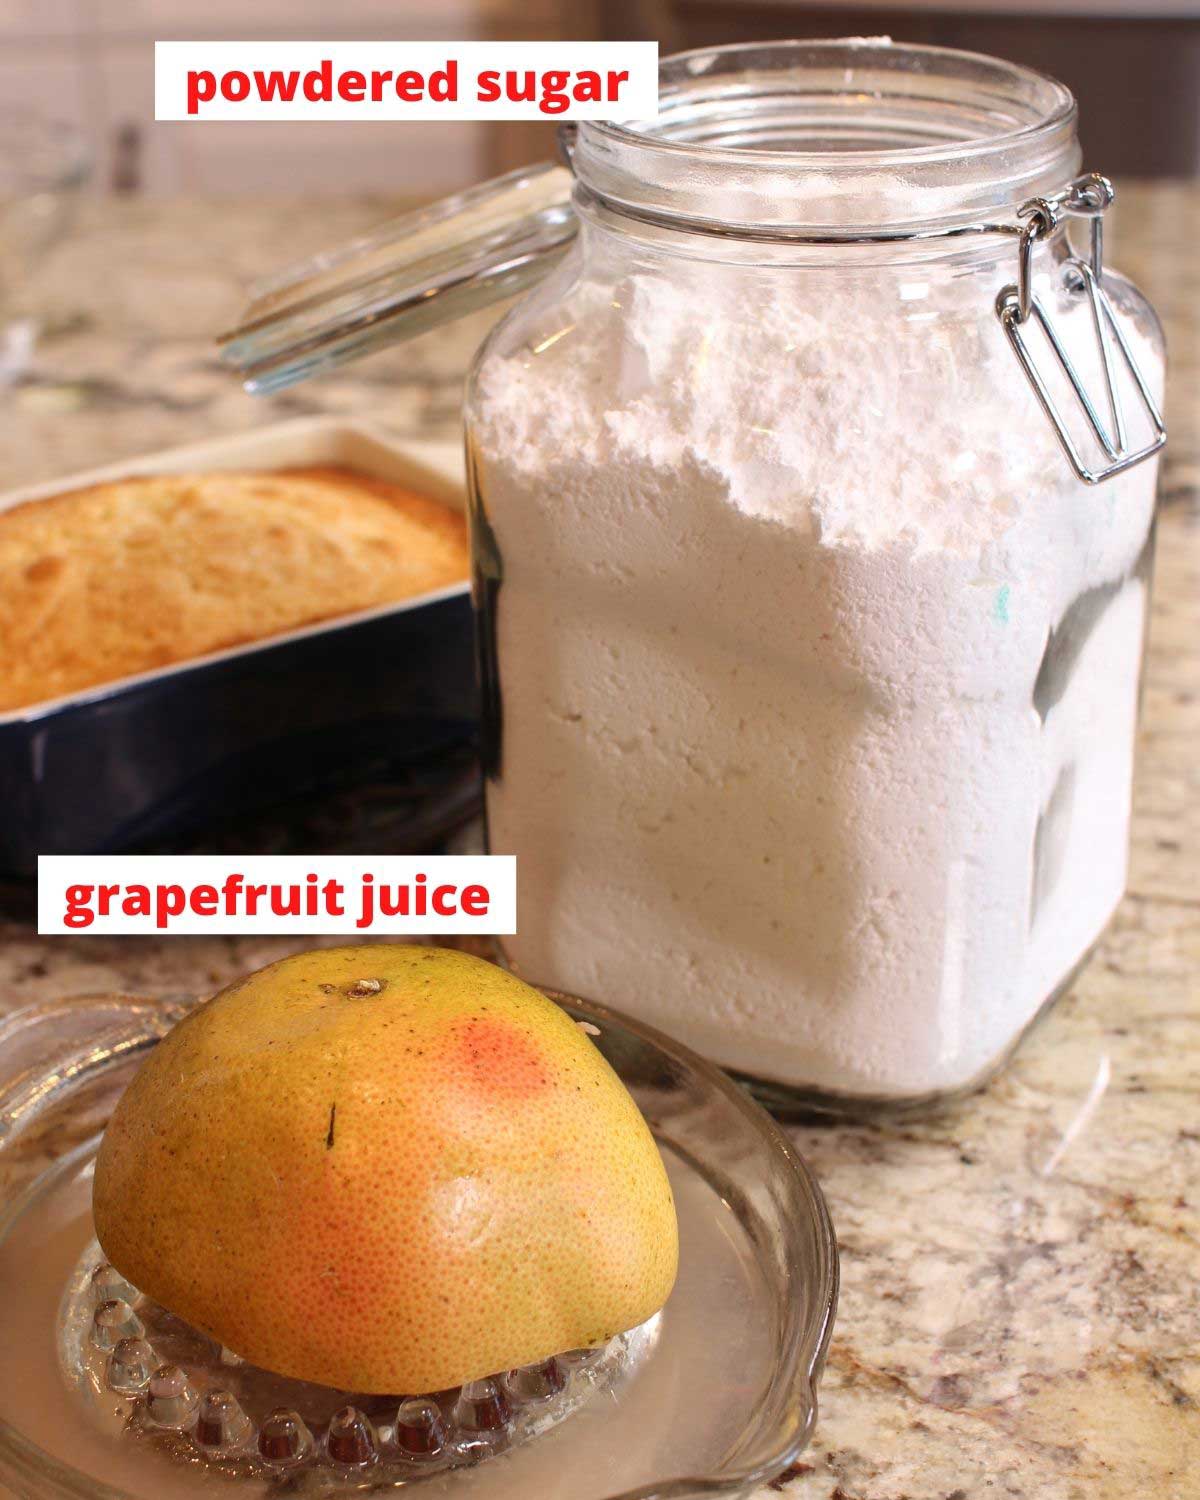 powdered sugar in a jar and a half of a grapefruit on a glass juicer on a brown kitchen counter.